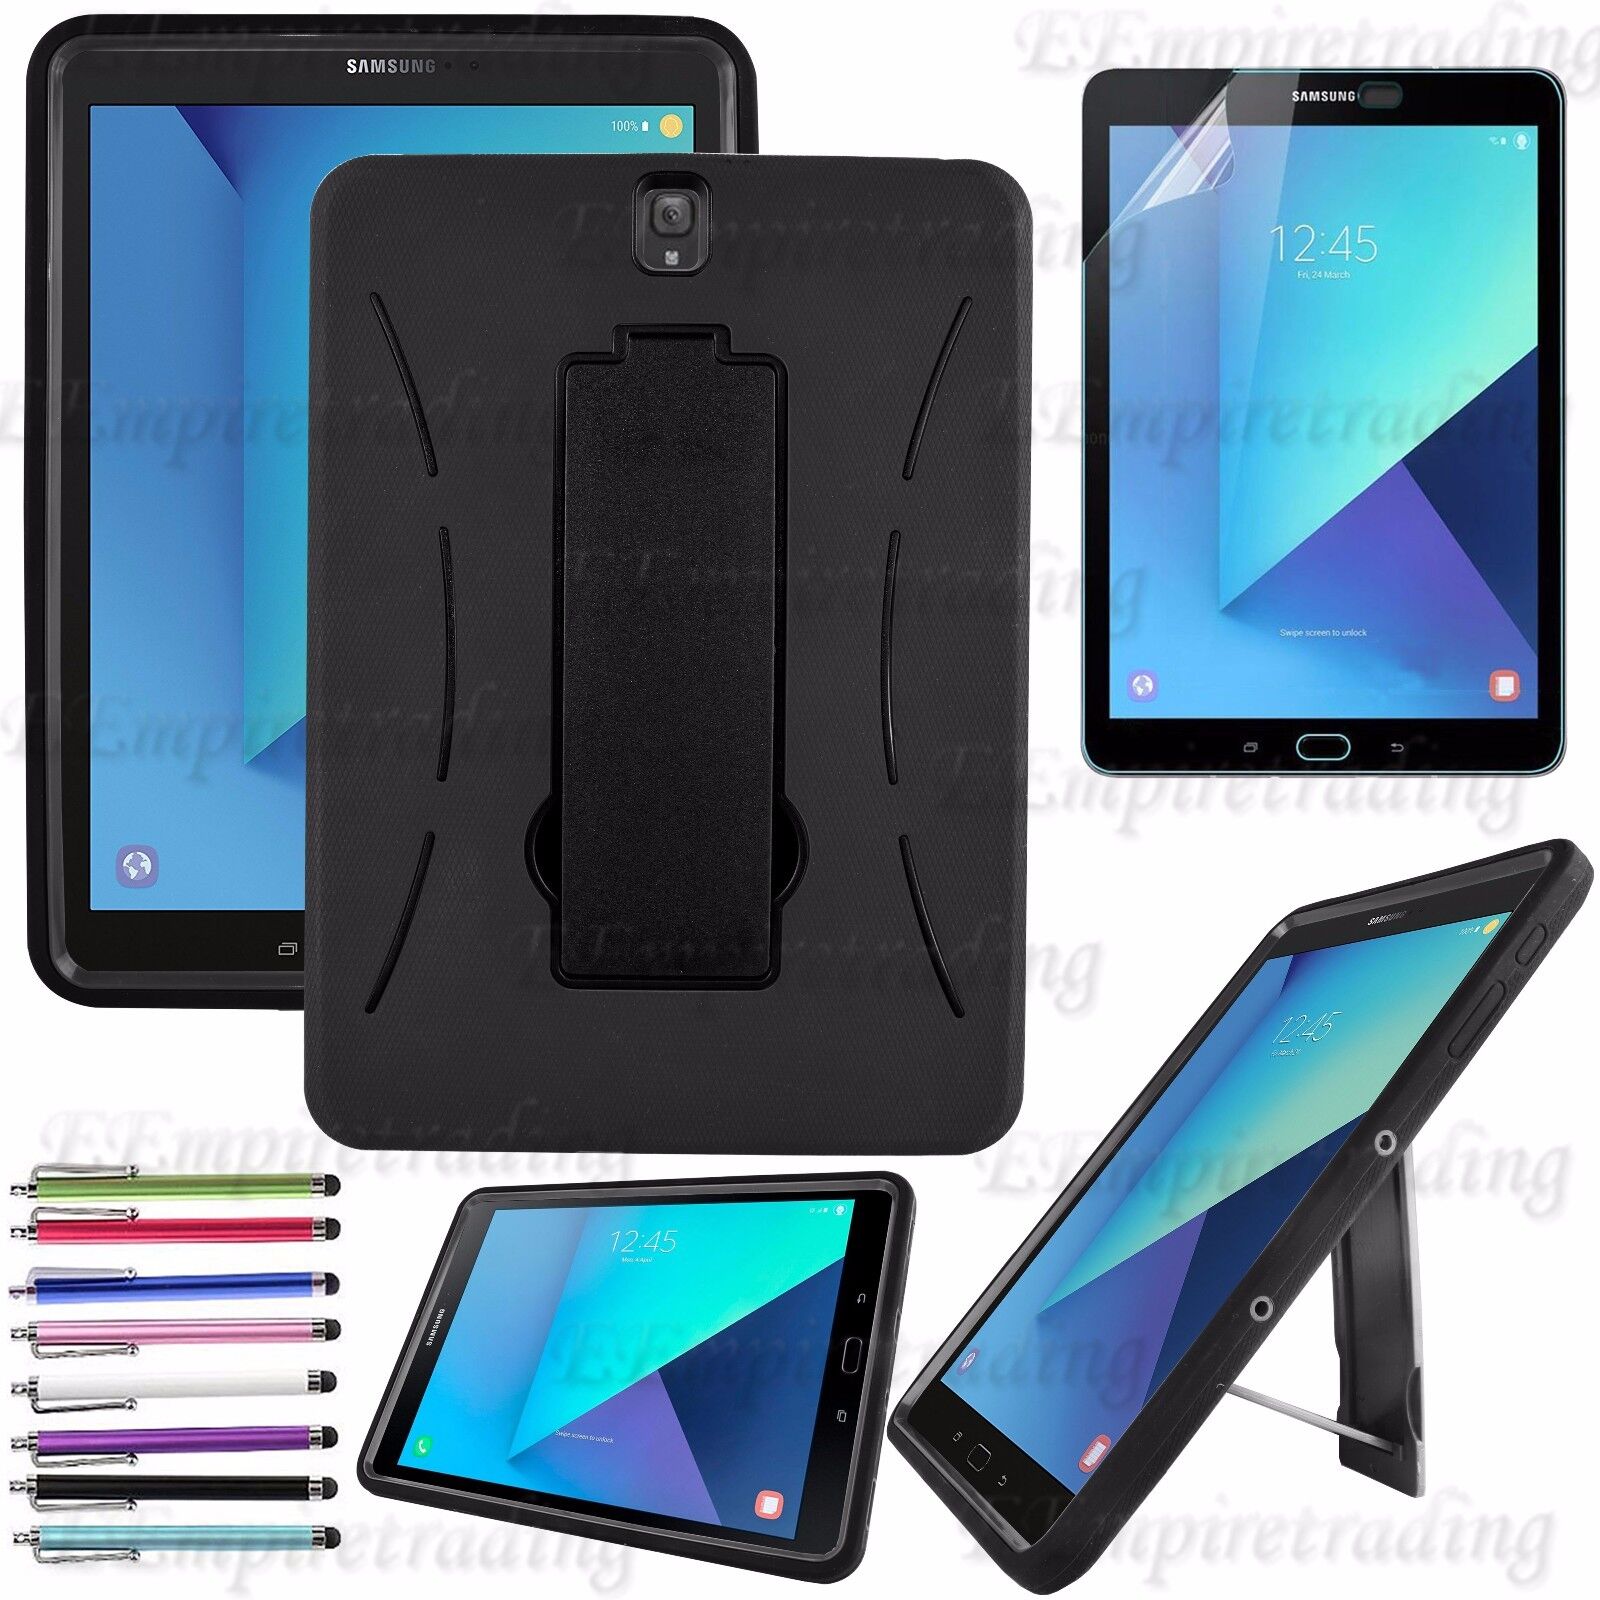 Hybrid Rugged Stand Shockproof Case Cover for Samsung Galaxy Tab A / S3 9.7 Inch